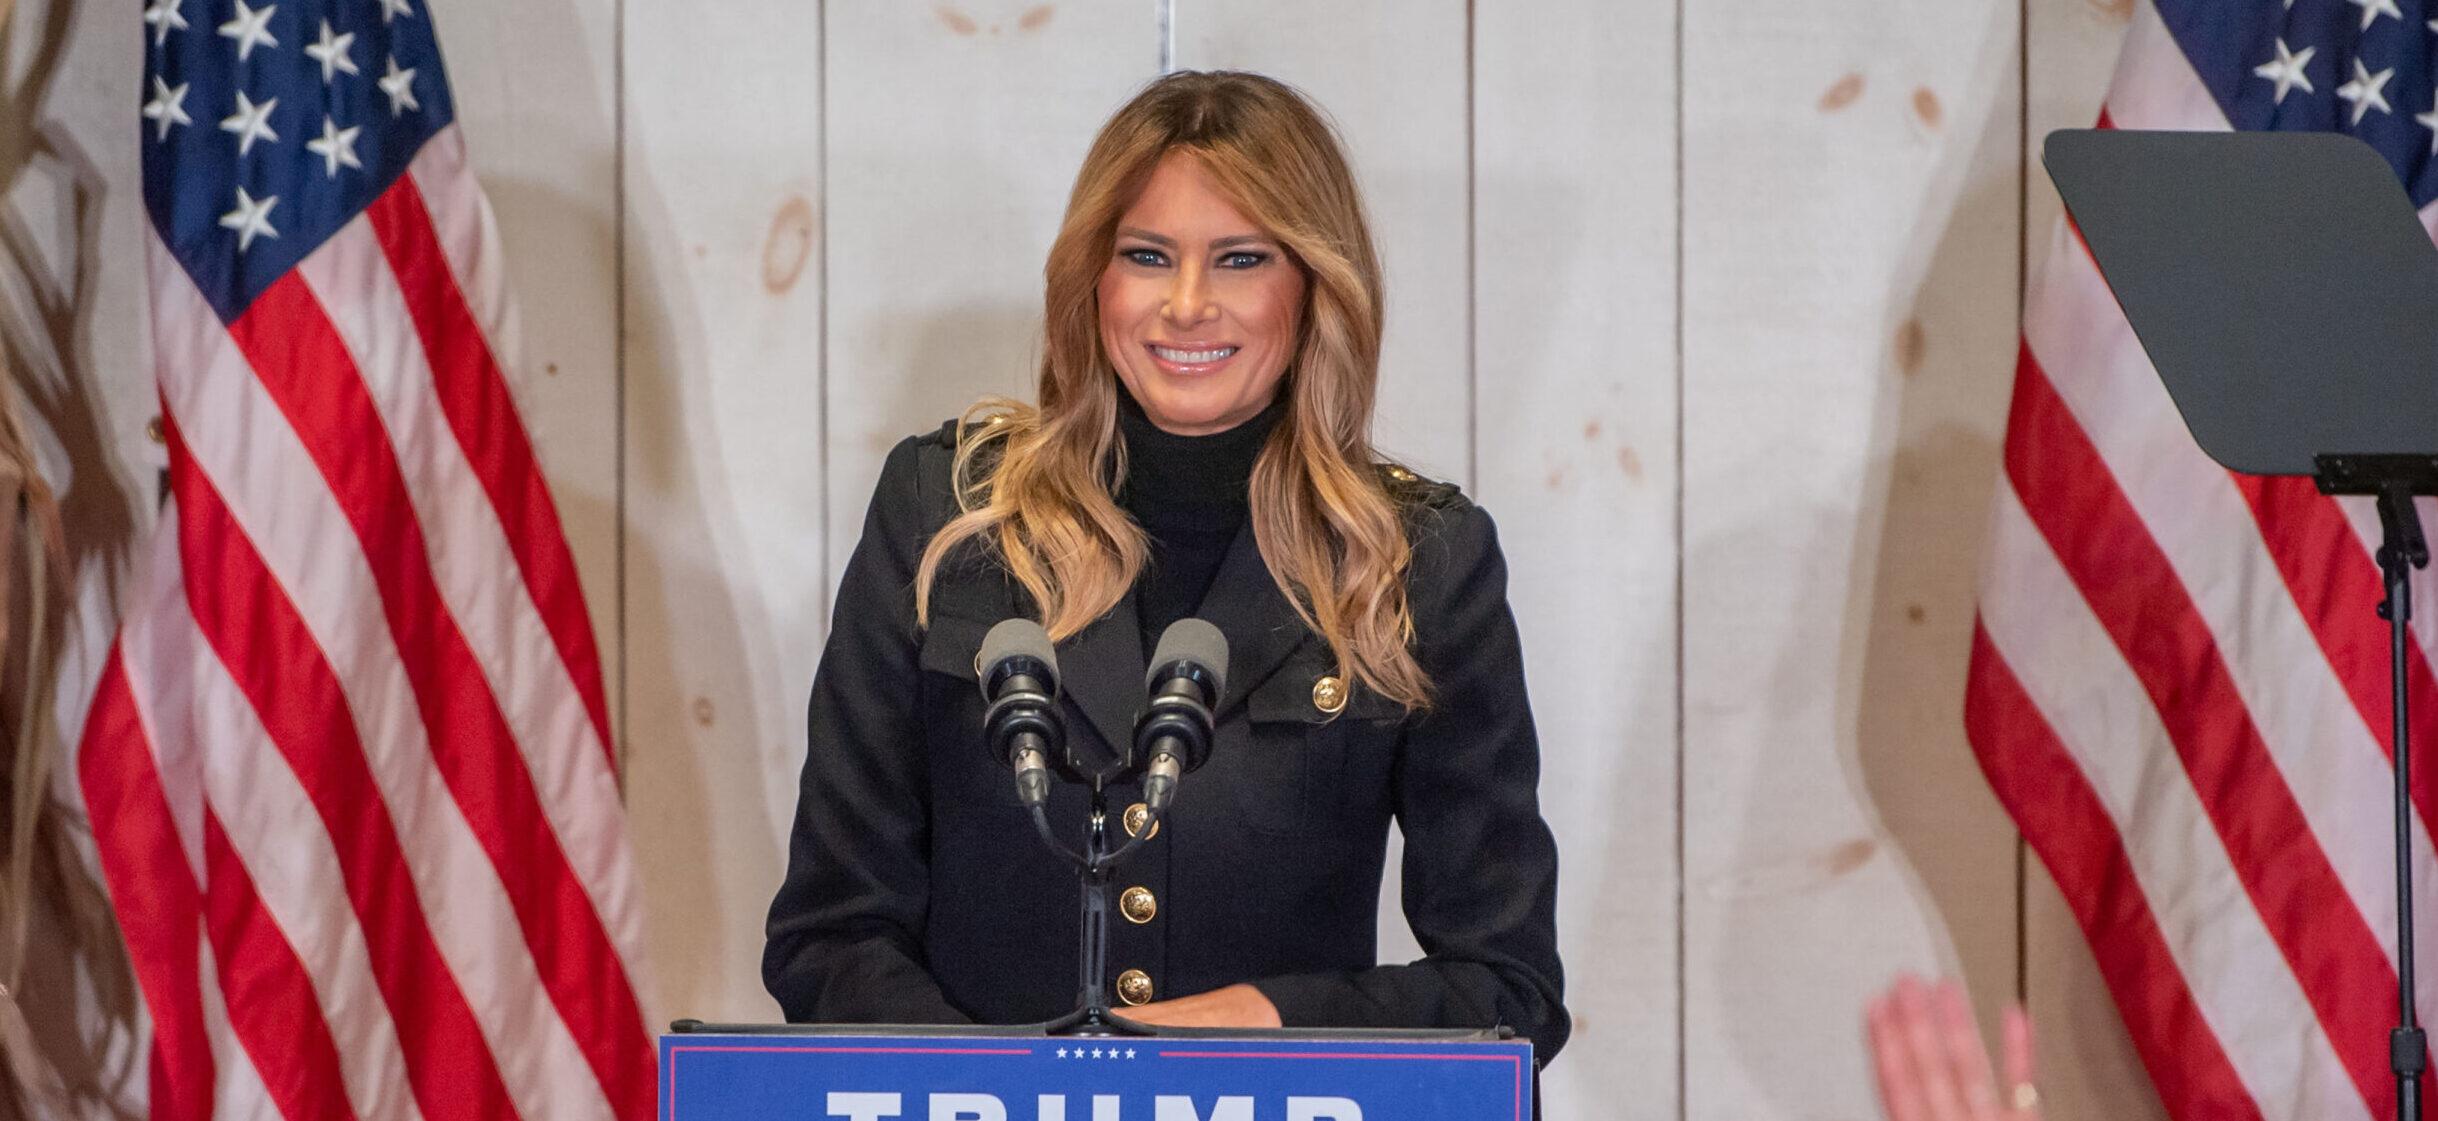 Melania Trump speaks to Donald Trump's supporters at a "Make America Great Again" campaign rally event on October 31, 2020 in Wapwallopen, PA.